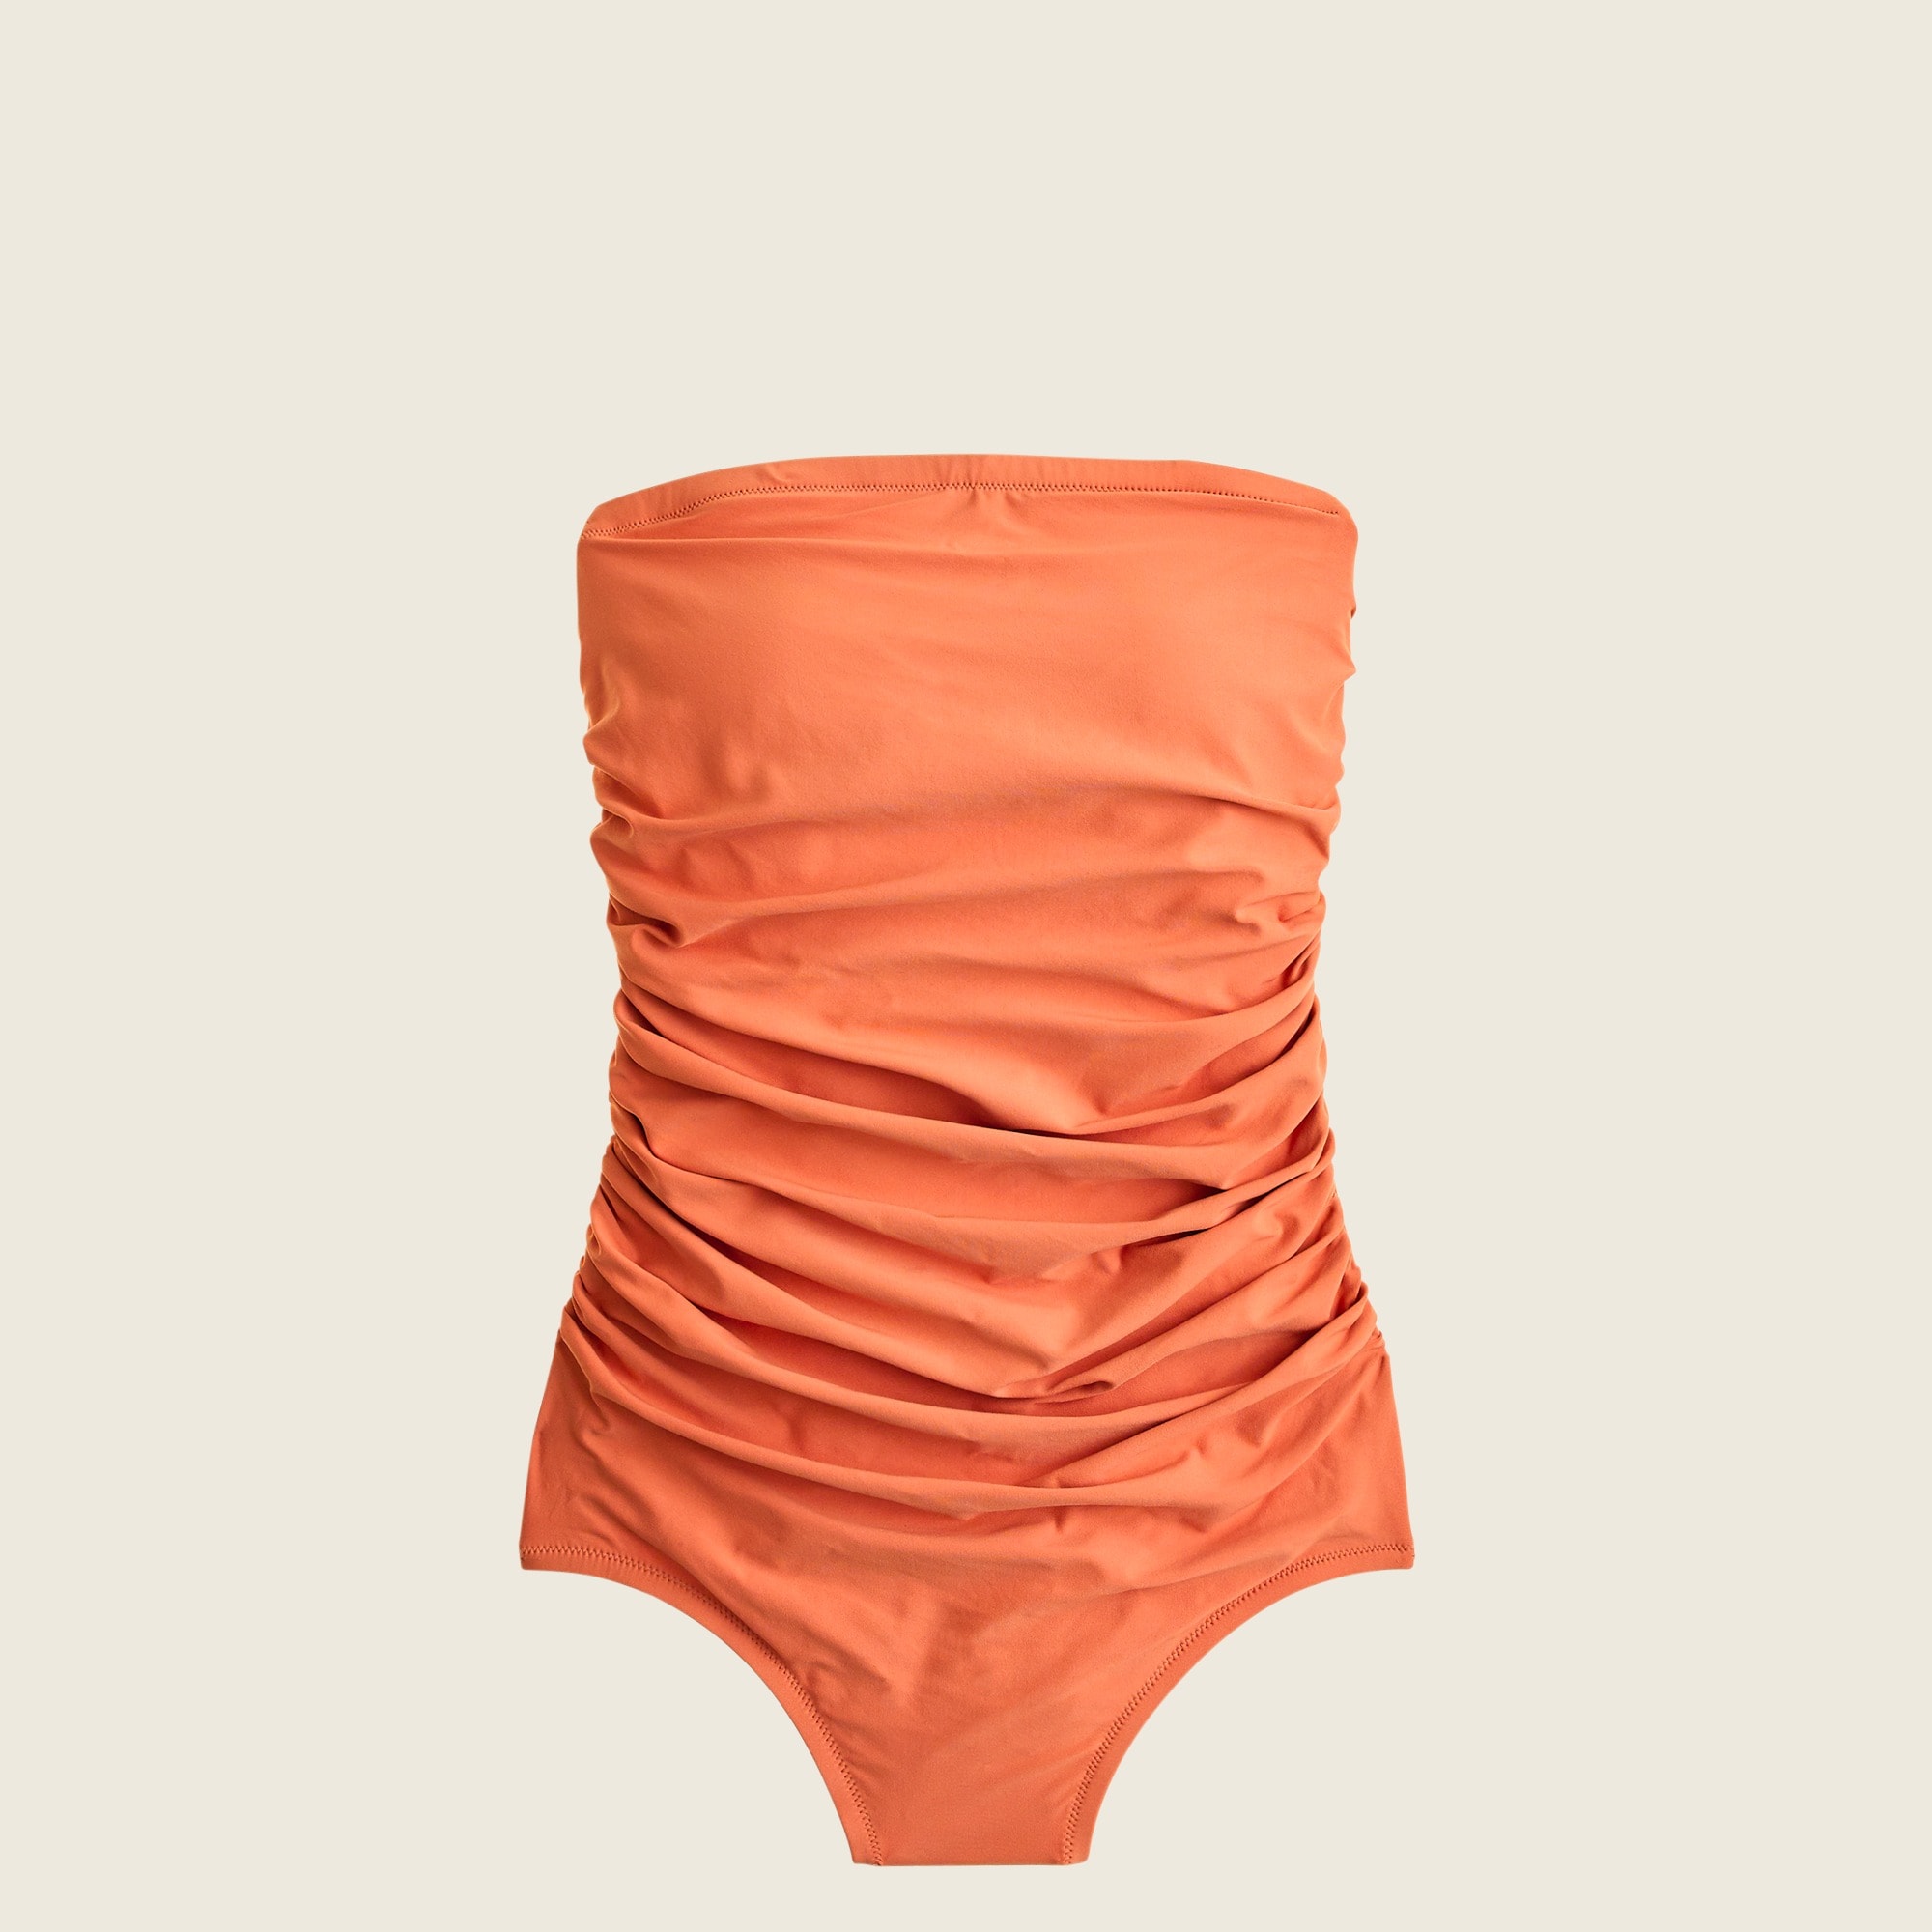 J Crew Ruched Bandeau One Piece Swimsuit For Women